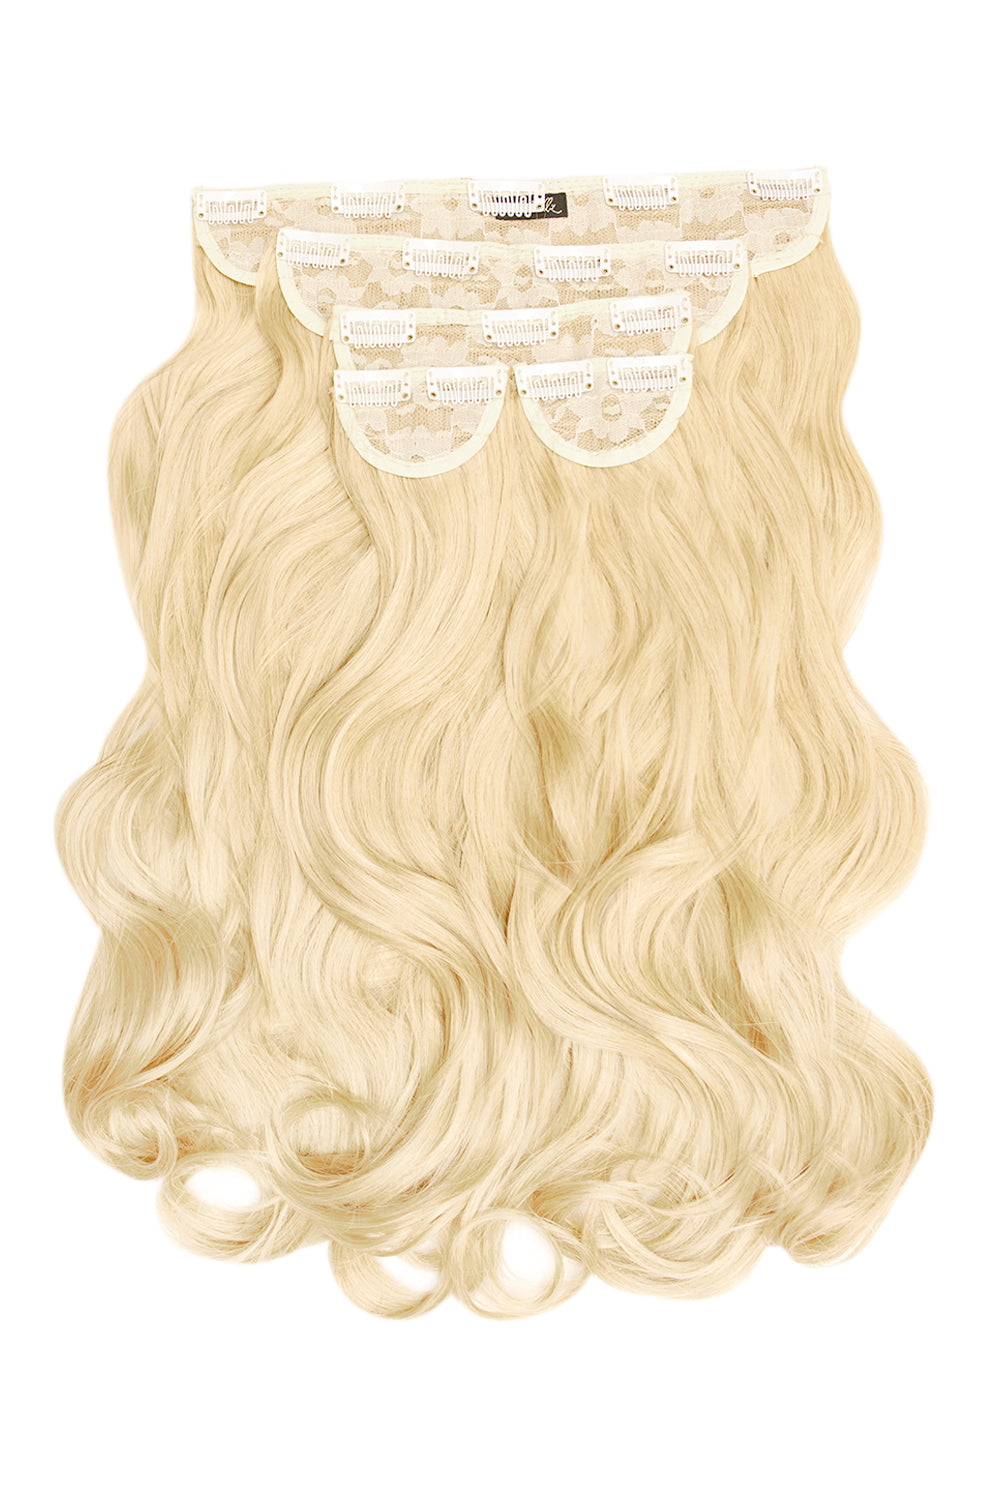 Super Thick 22" 5 Piece Natural Wavy Clip In Hair Extensions - LullaBellz - Pure Blonde